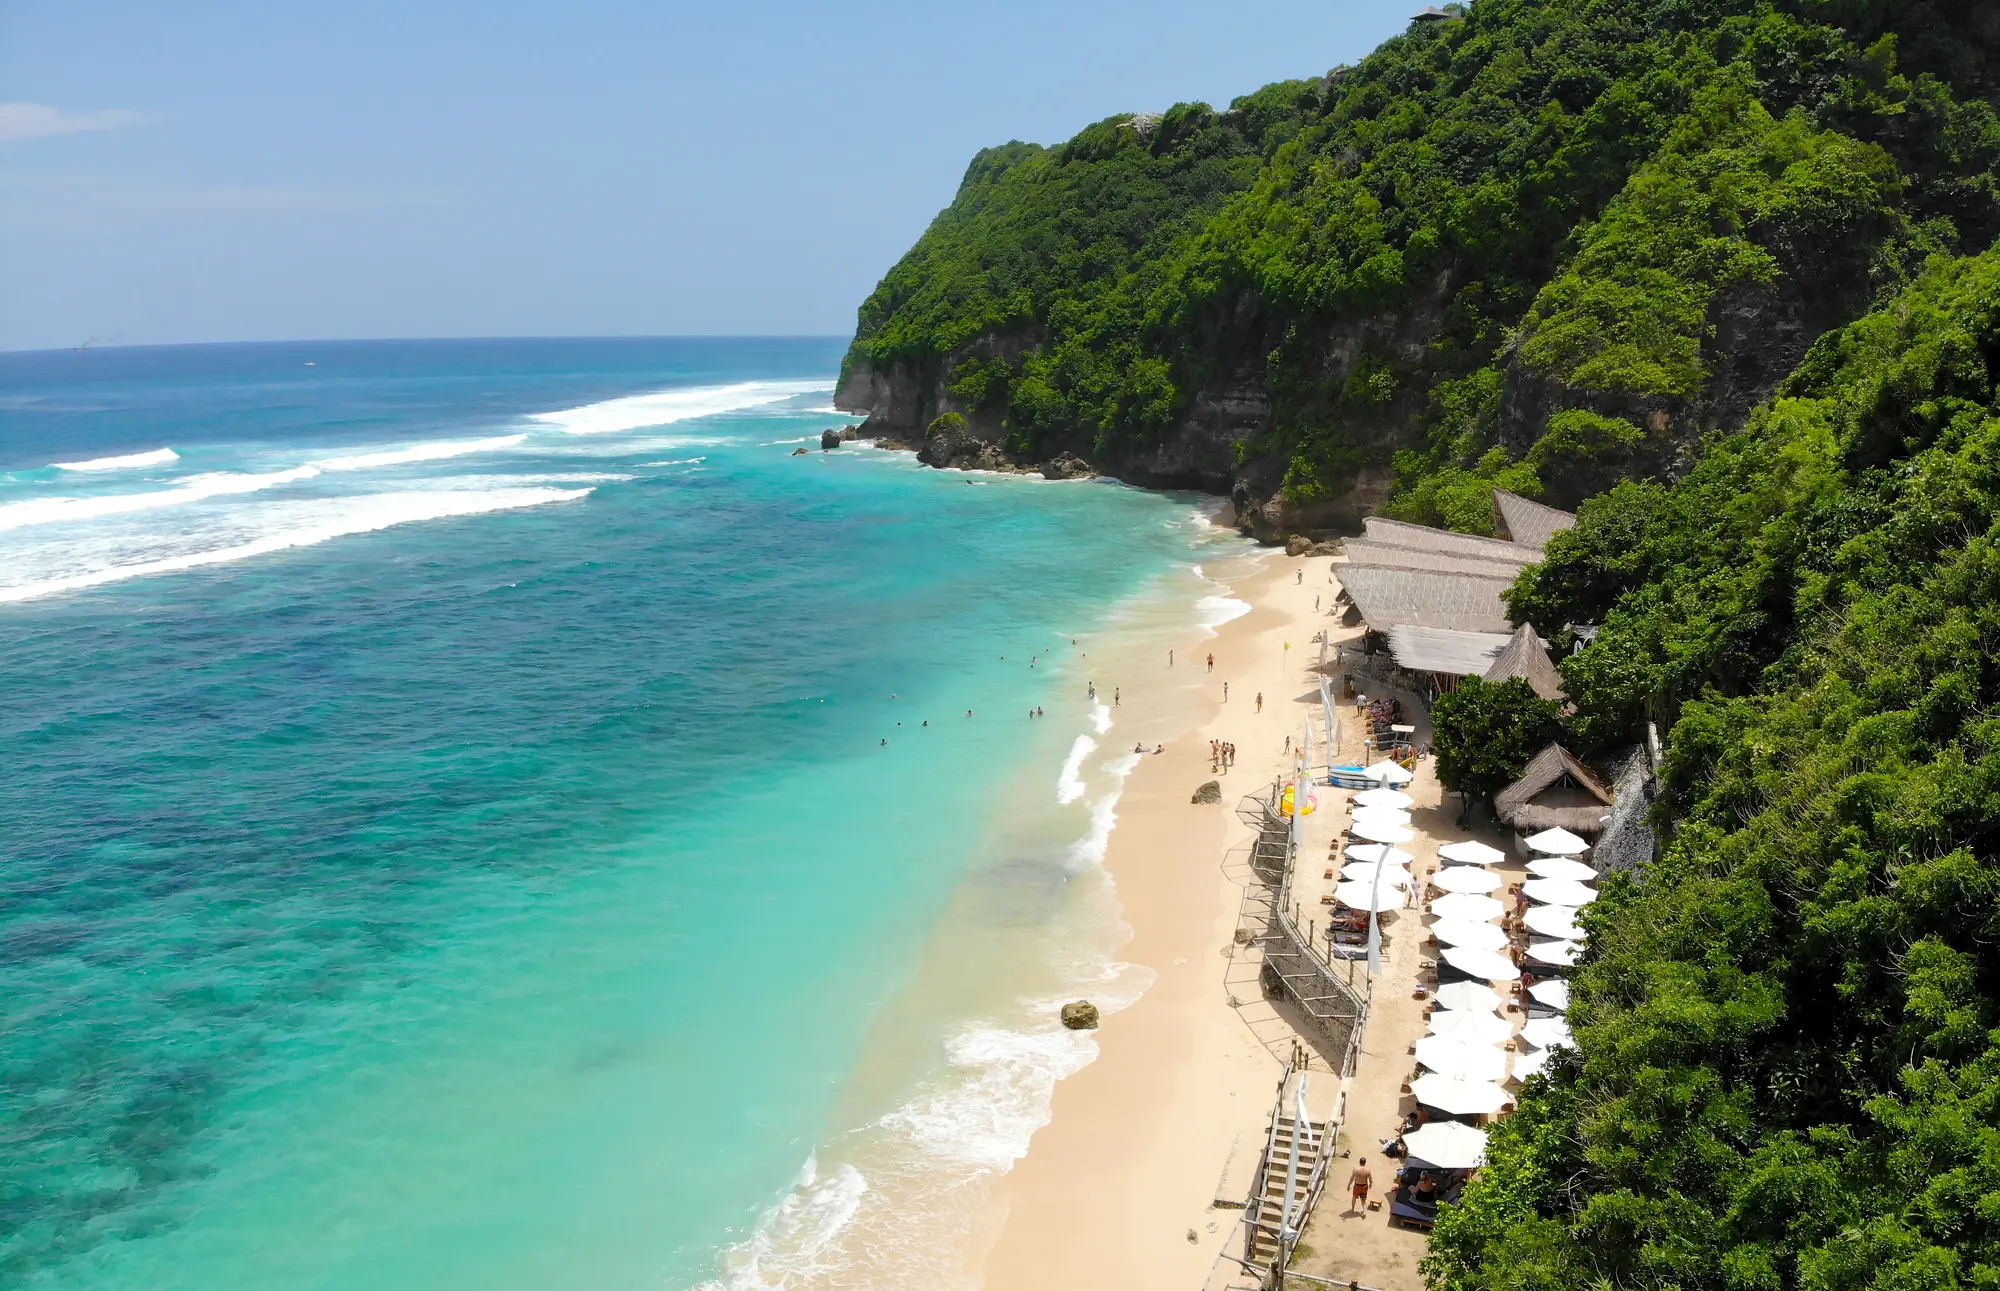 Aerial view of white sand beach, turquoise water and rows of white umbrellas at Sundays Beach Club, one of the best beaches in Uluwatu Bali.